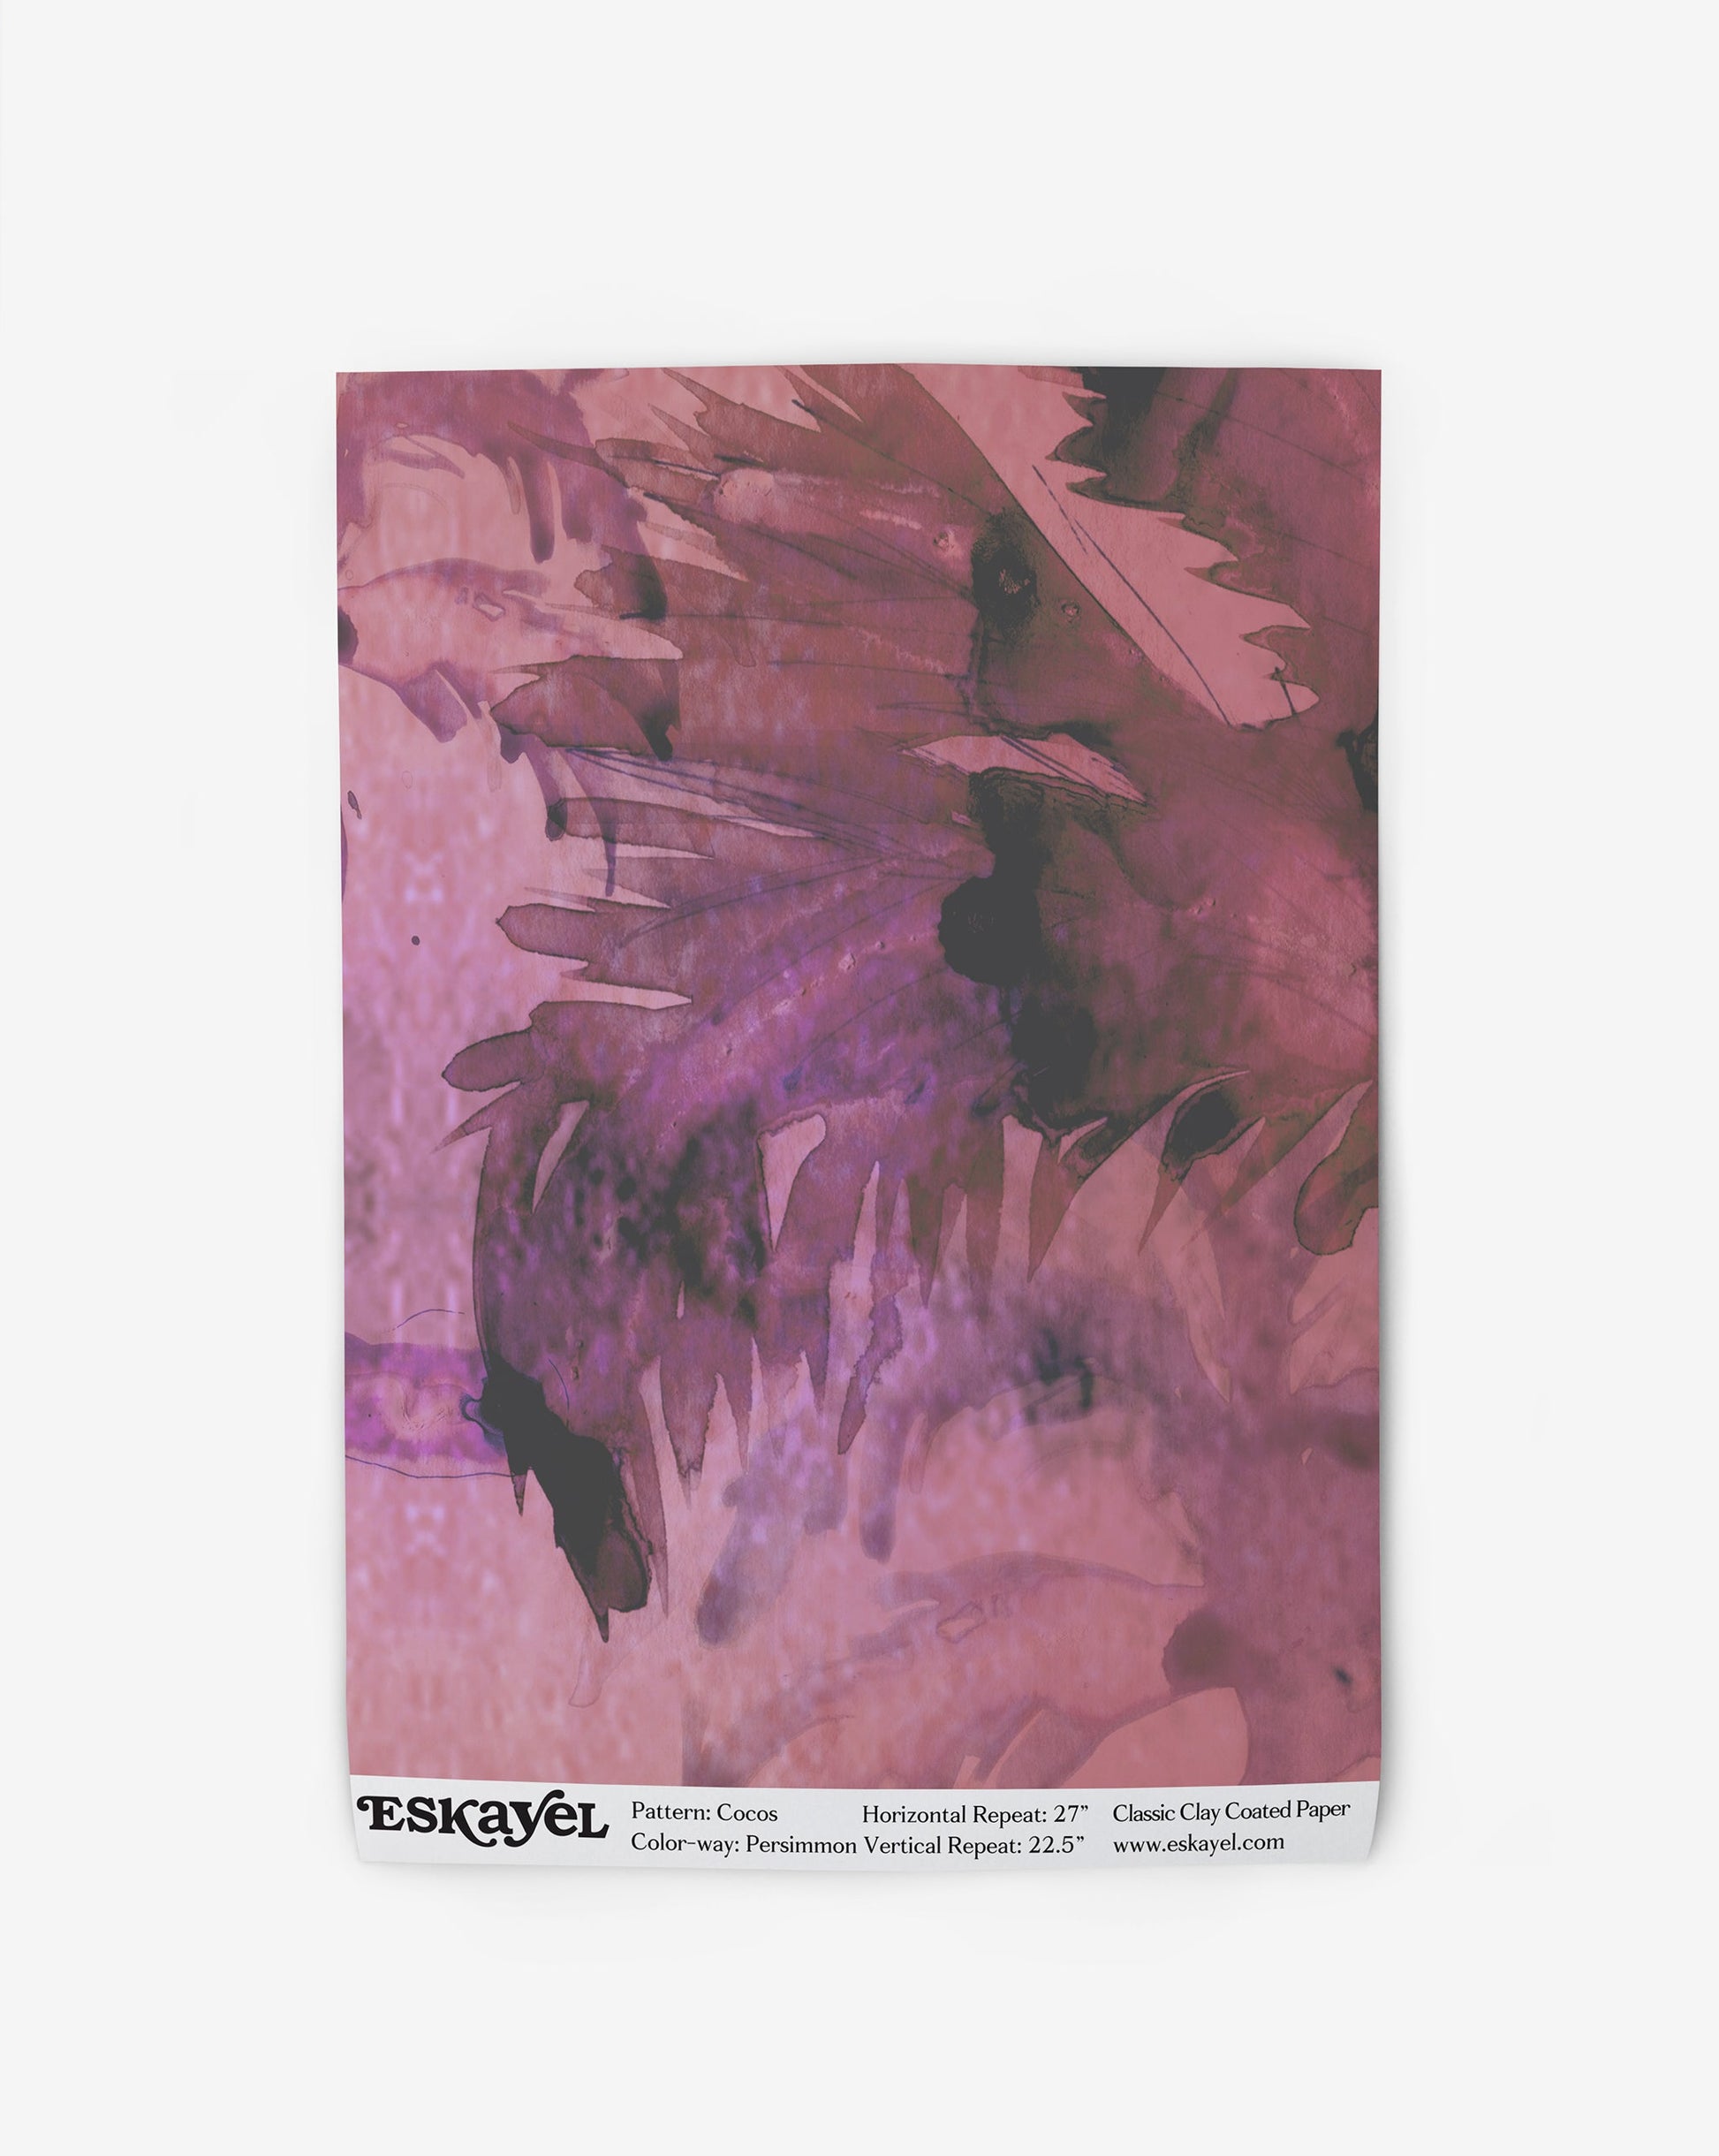 Abstract watercolor design in shades of purple and pink on a high-end fabric swatch with "Cocos Wallpaper" label, detailing pattern name and dimensions.